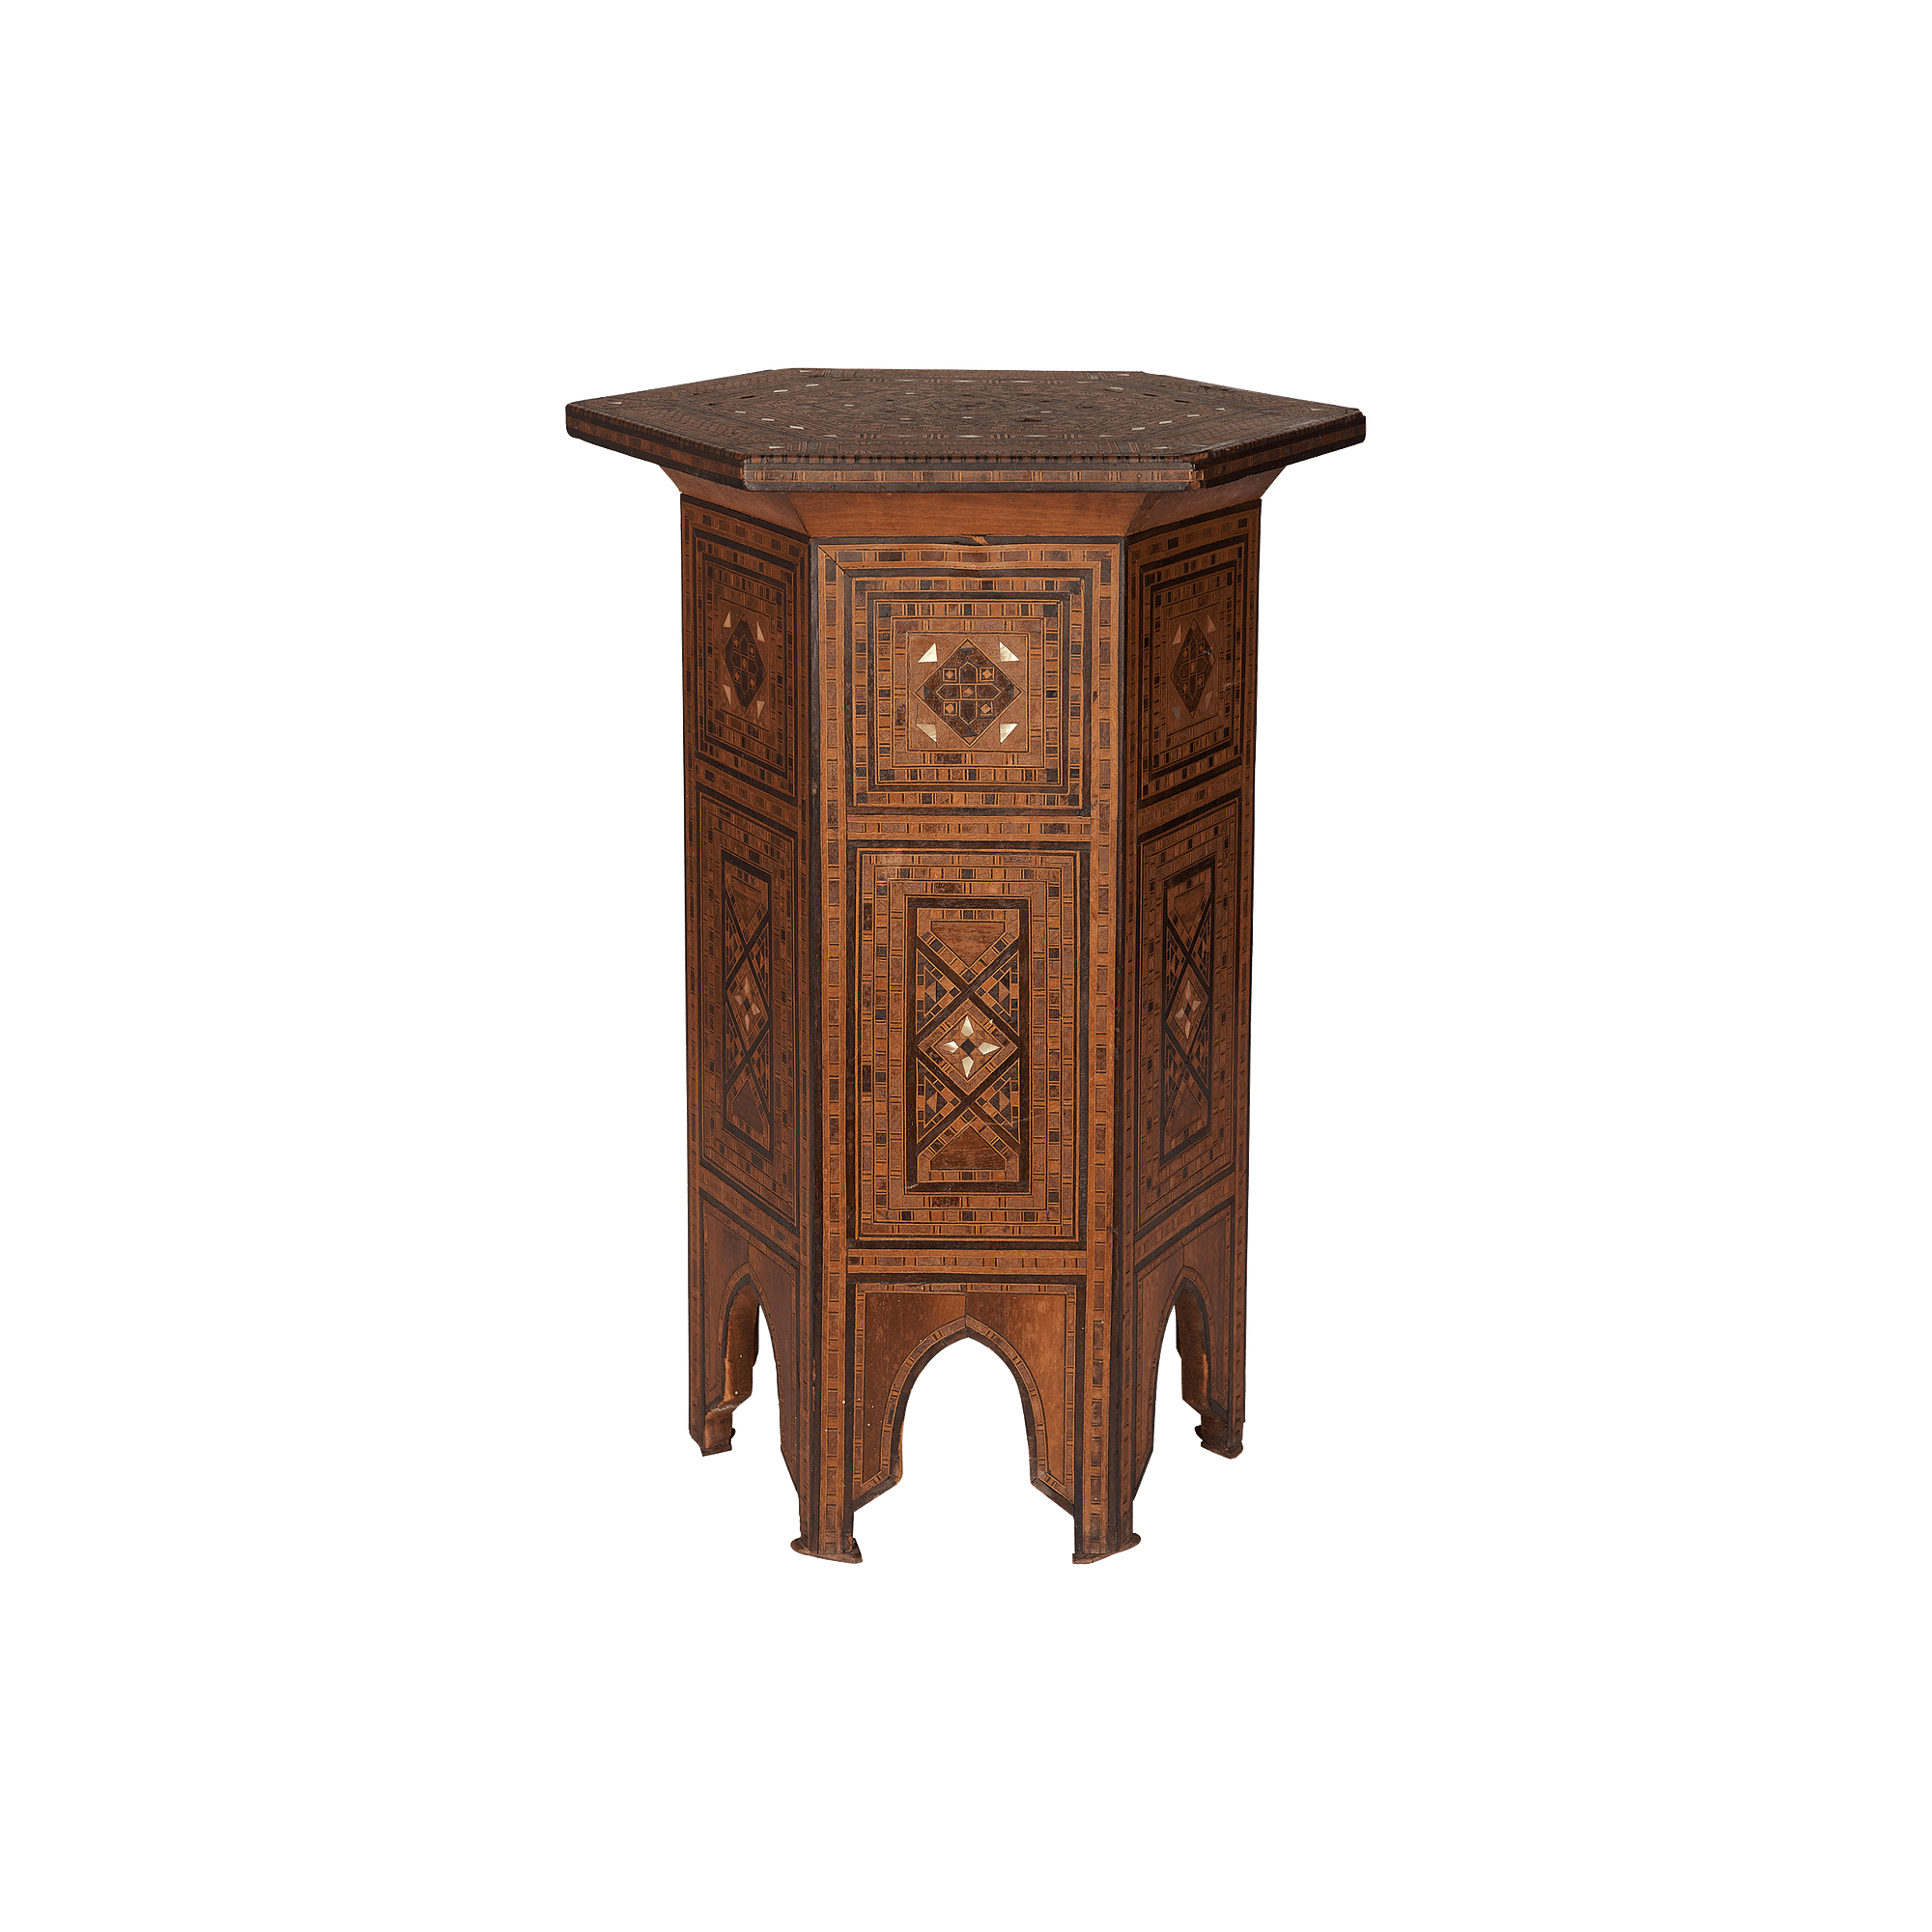 IET-001 Tall Inlaid Eastern Table